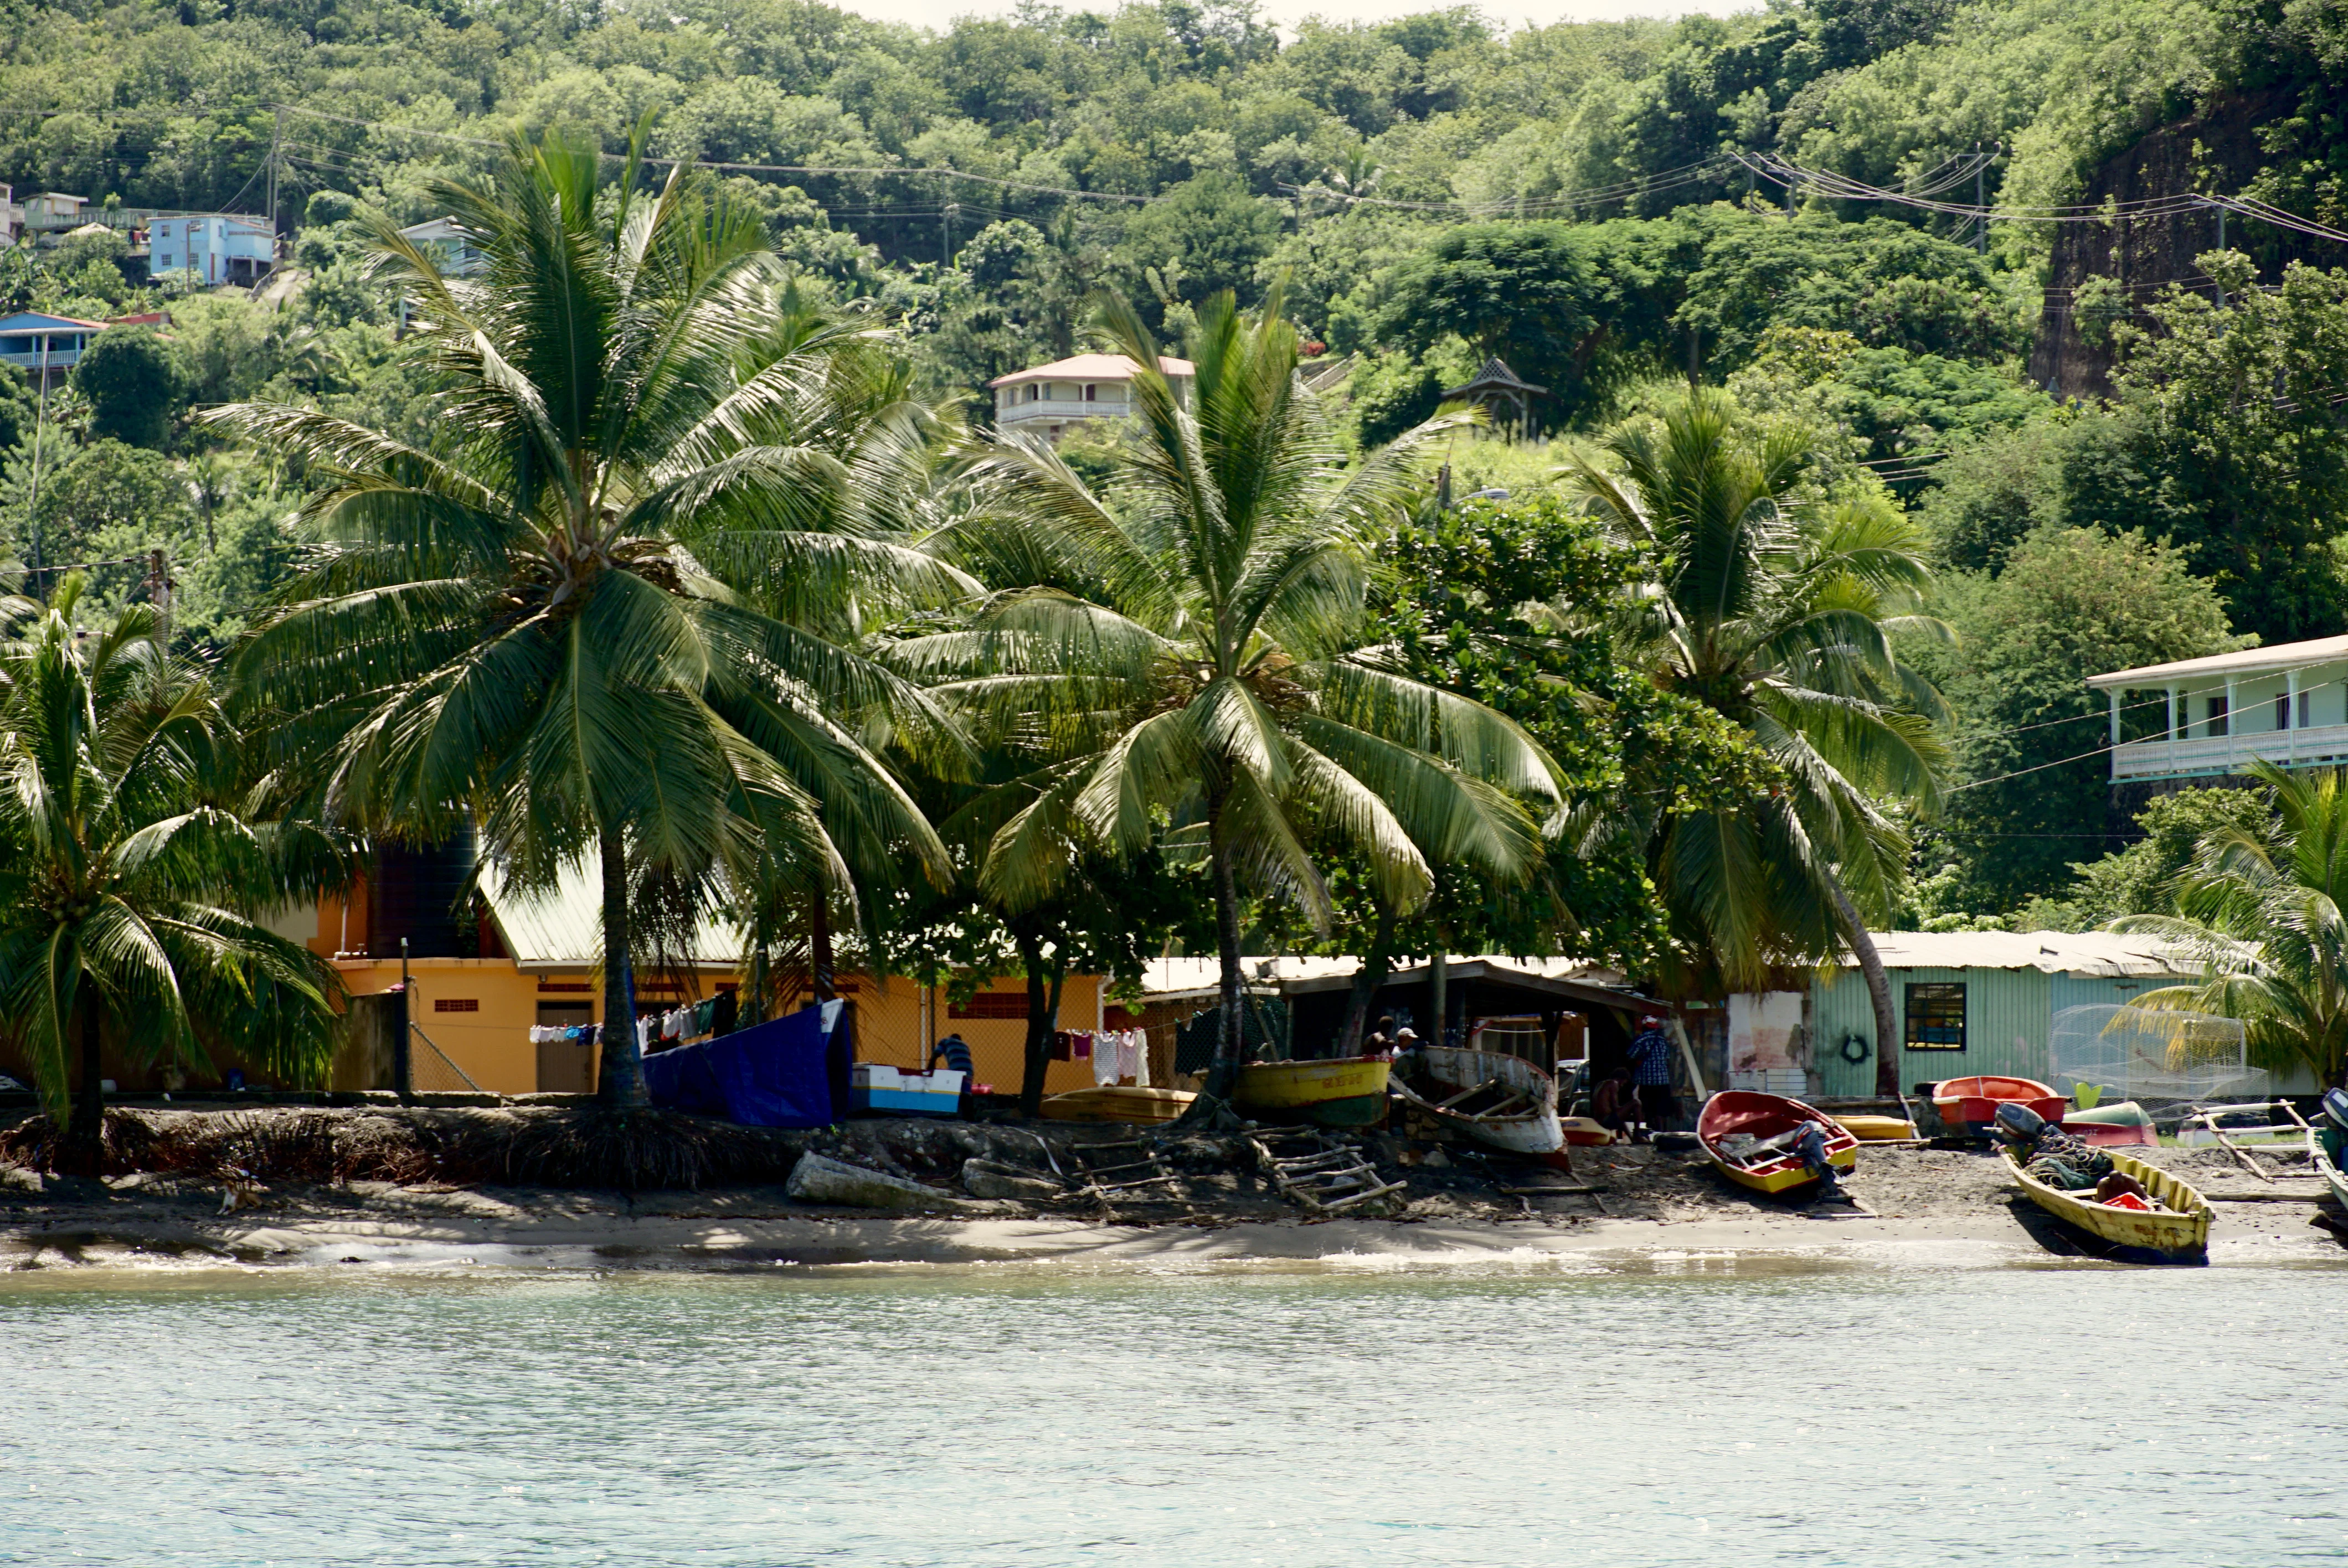 cruising by an old fishing village in St. Lucia, which is best done on a private boat tour in the caribbean